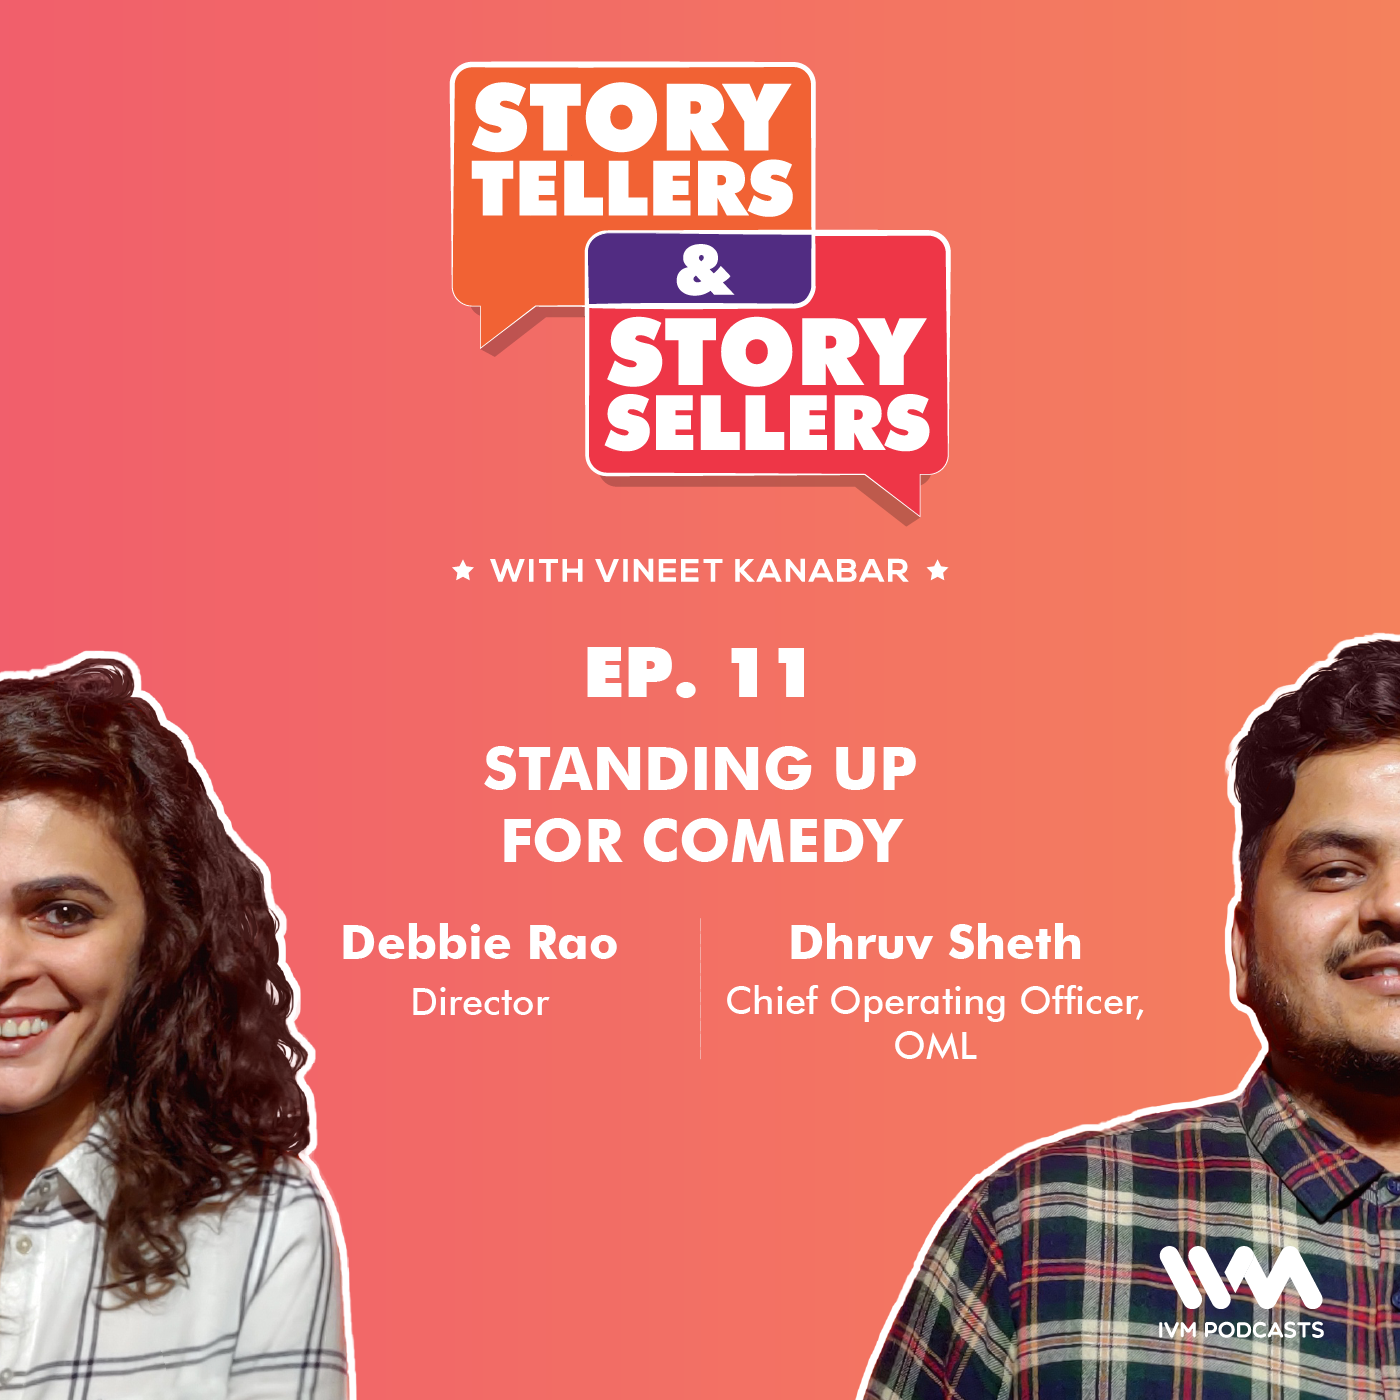 Dhruv Sheth and Debbie Rao on Standing Up For Comedy